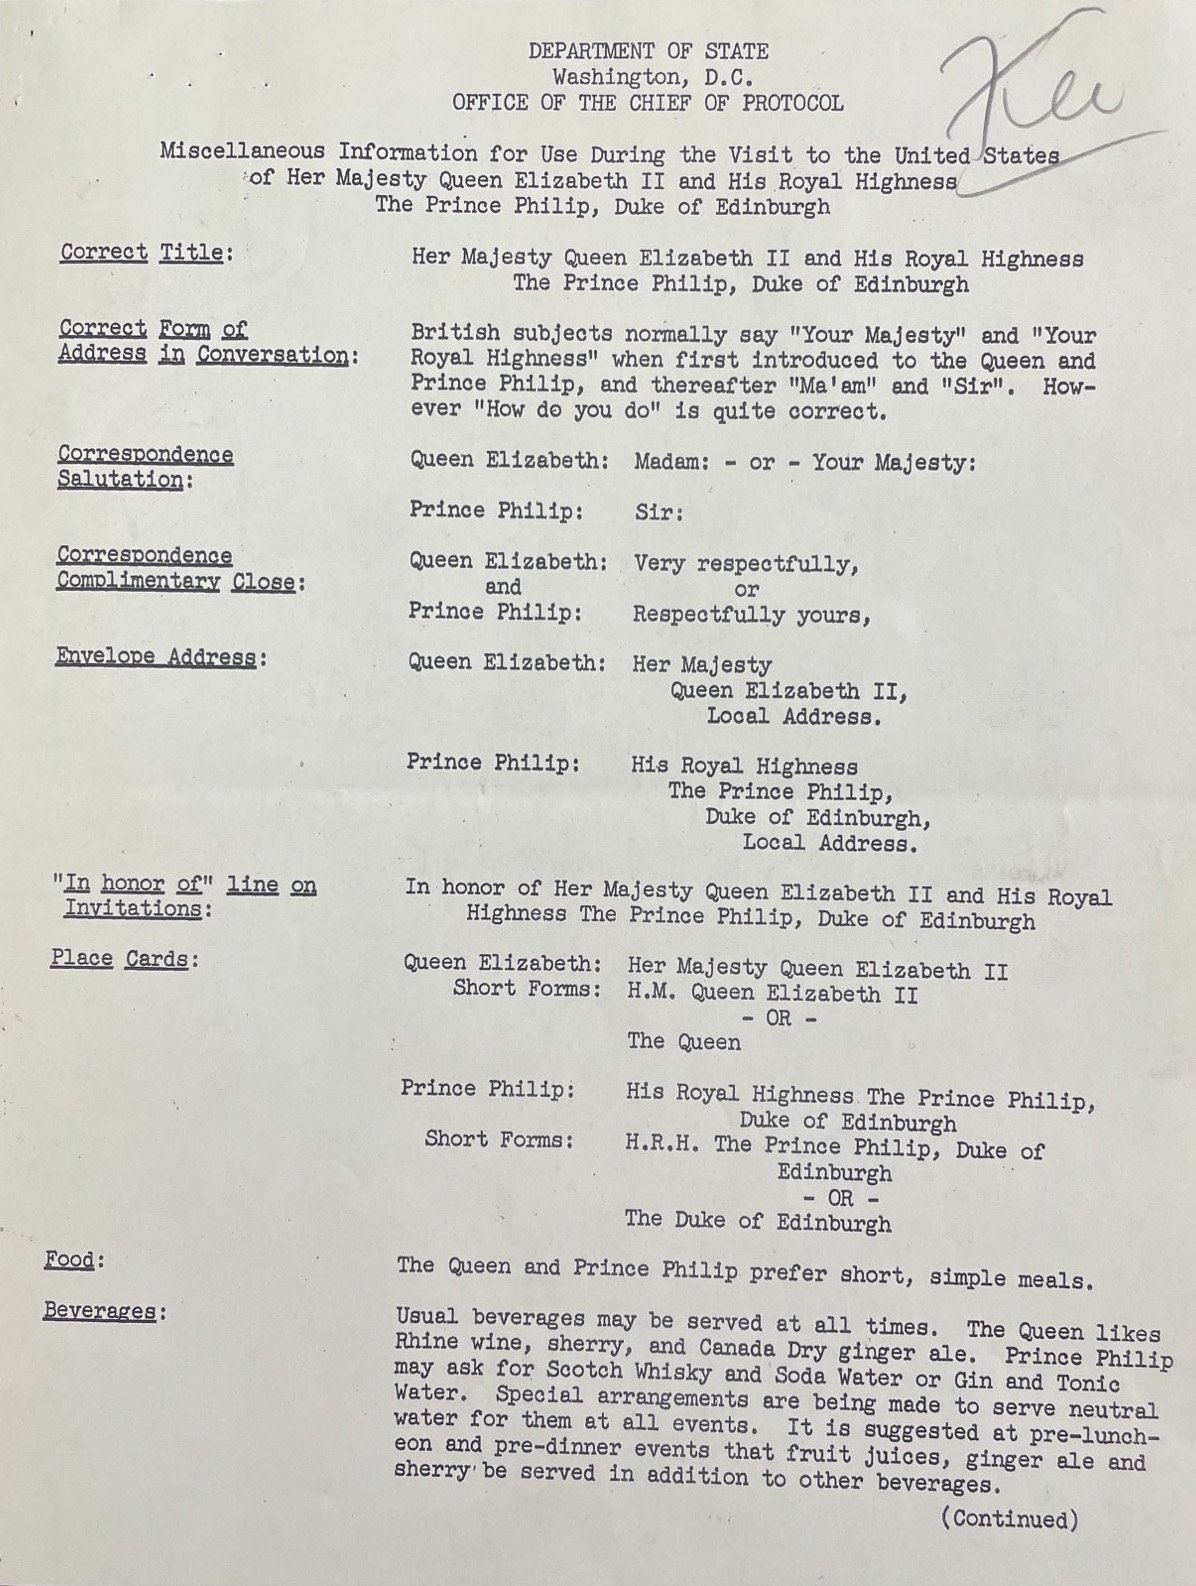 Memo on protocol for the Queen's visit, Department of State, Office of the Chief of Protocol. Mayor Wagner papers, NYC Municipal Archives.